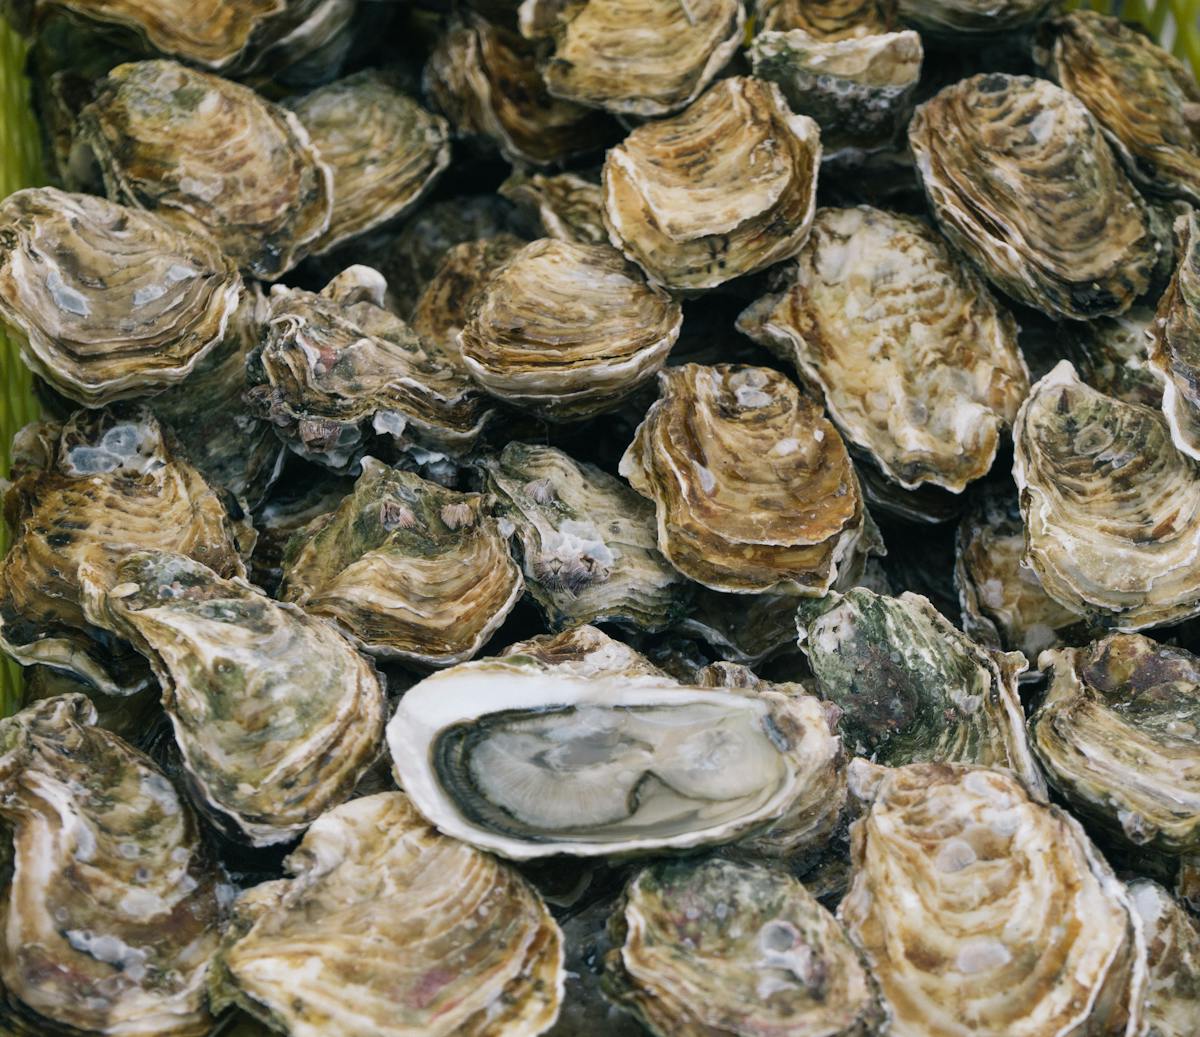 close up of oysters